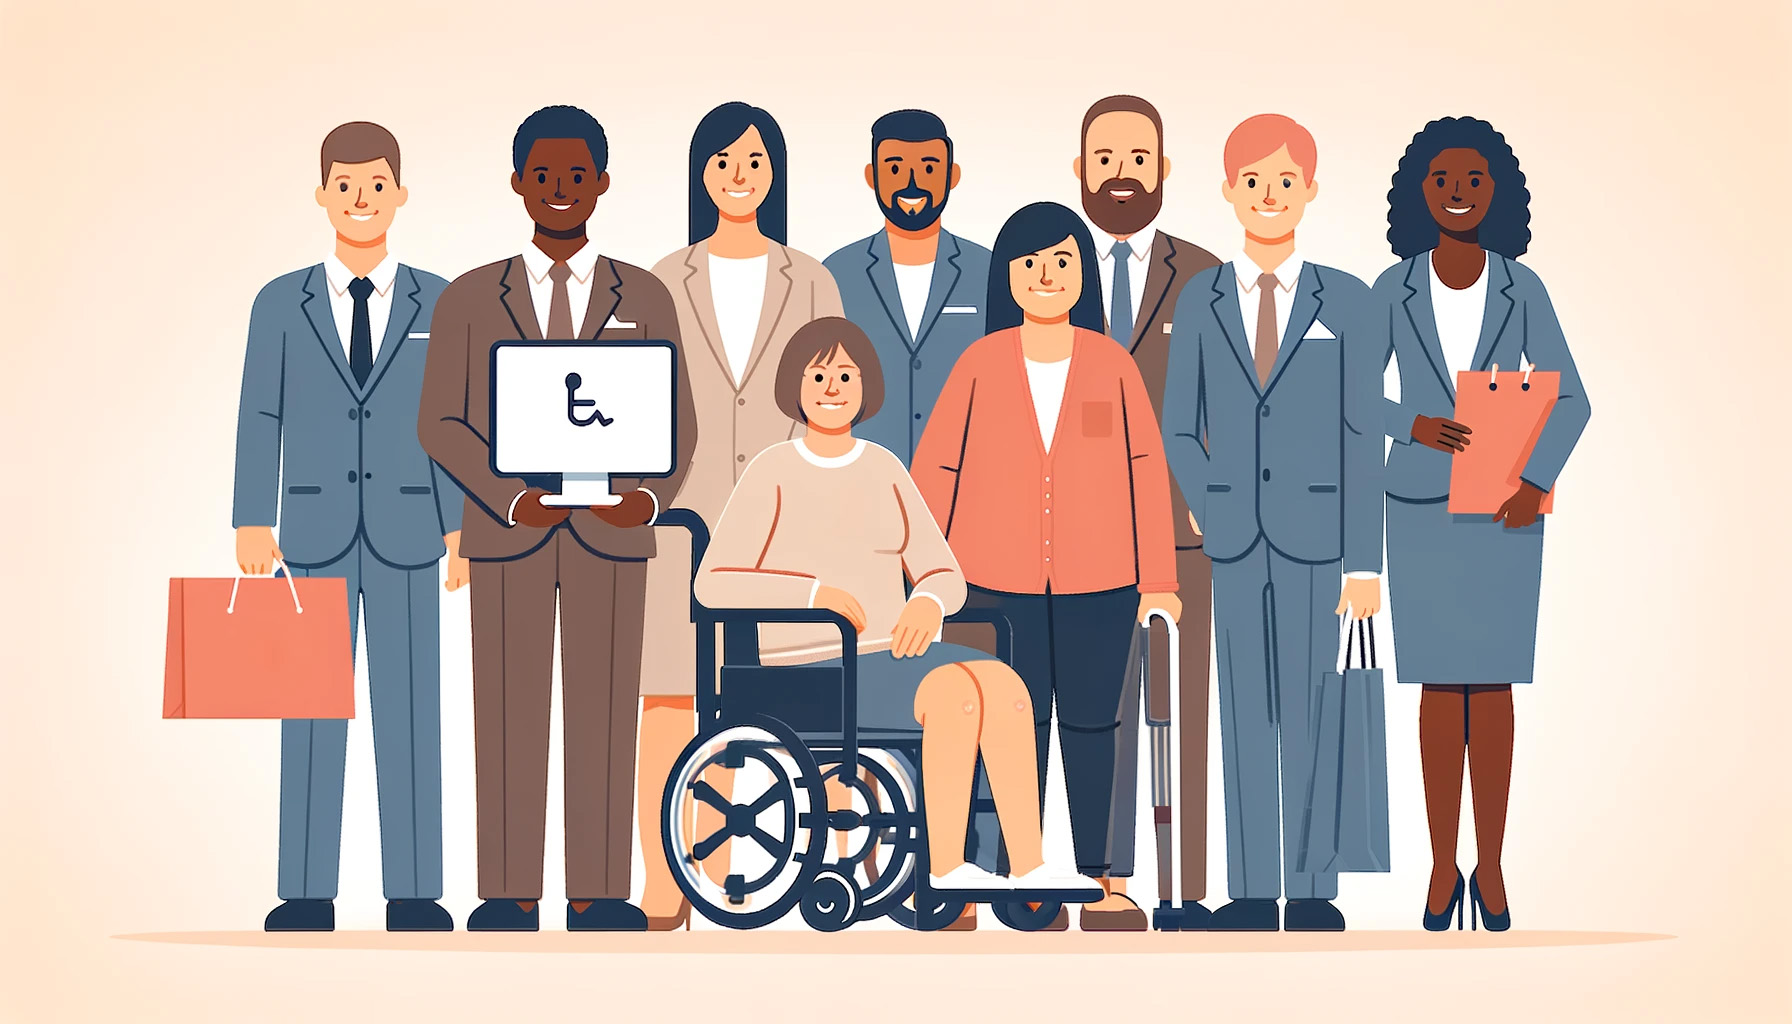 group of people showcasing various levels of ability, disability, inclusion